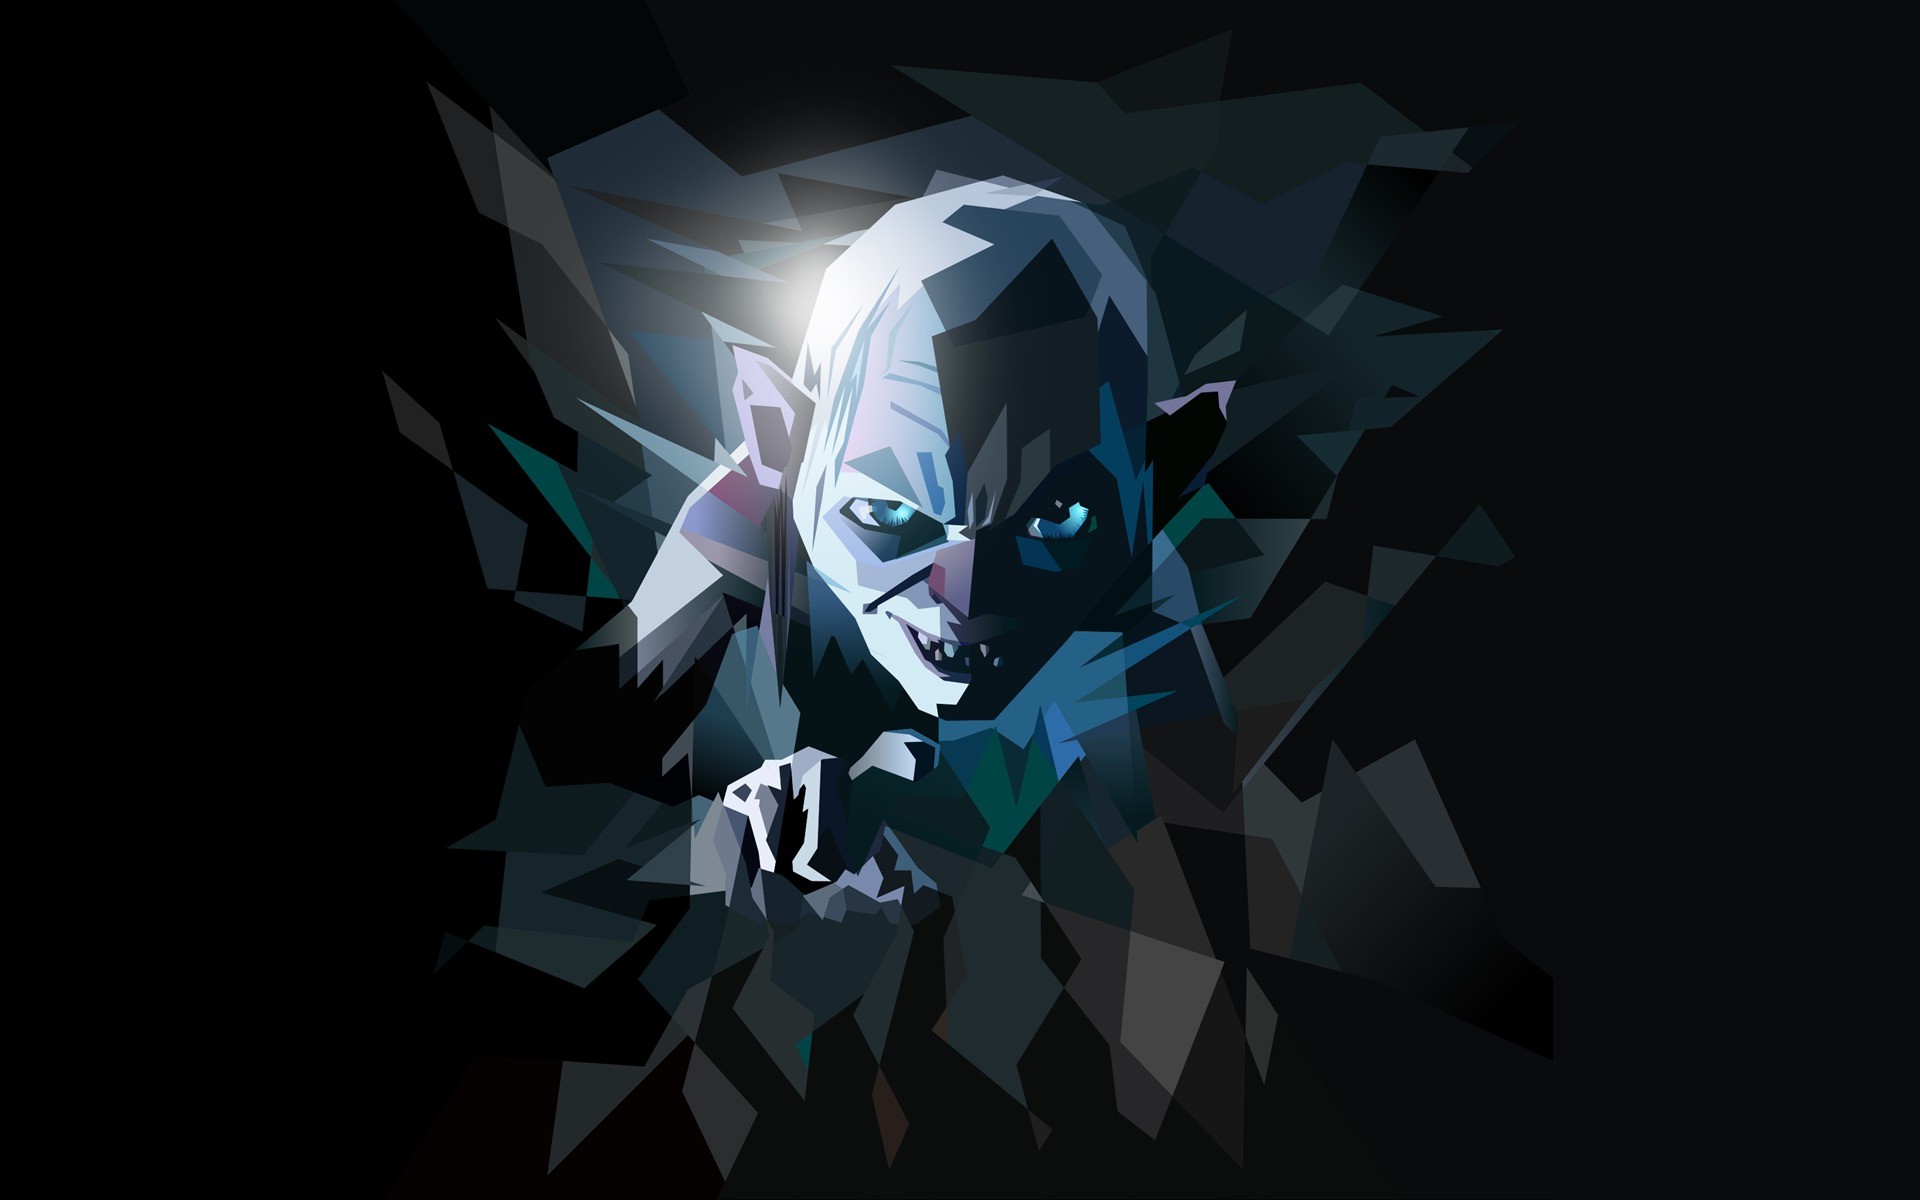 Gollum, Low Poly, The Lord Of The Rings, Digital Art Wallpaper